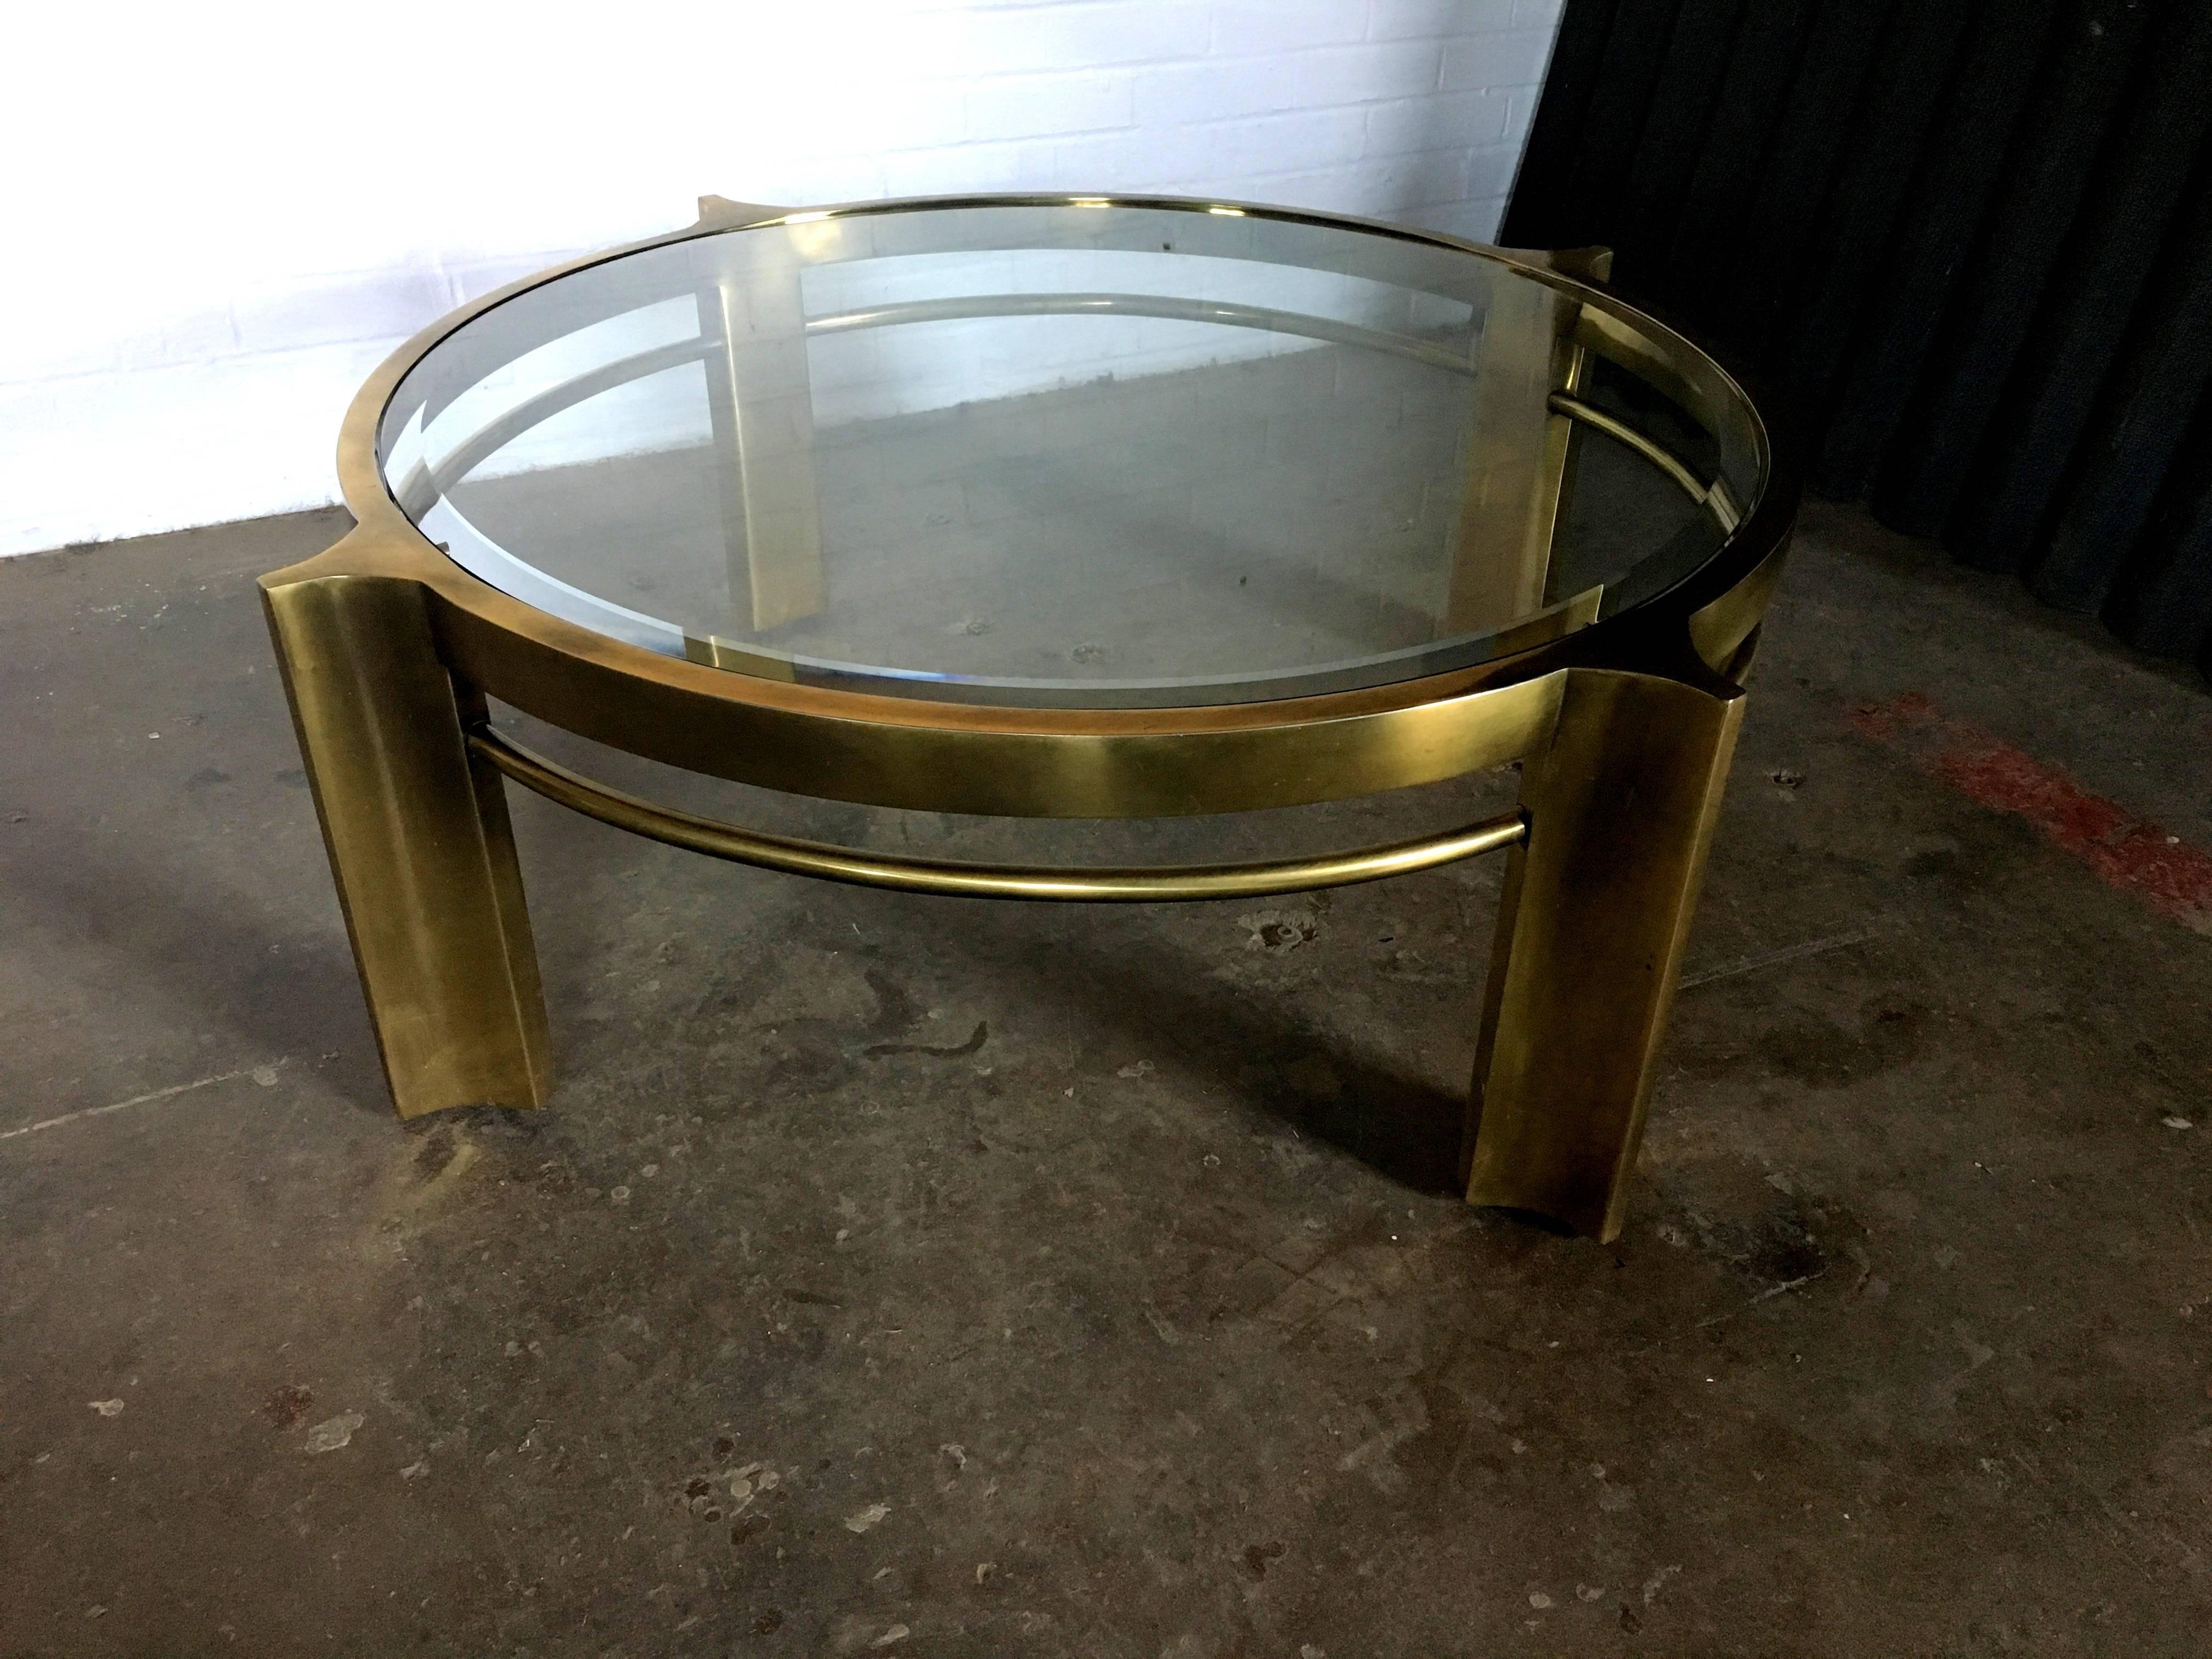 Lovely and gorgeous brass cocktail table by Mastercraft.
Very good condition with minor age appropriate wear. See photos.
No chips or breaks in beveled round glass. Minor scratches as normal.
Measure: 43" across
36" glass
15.25"